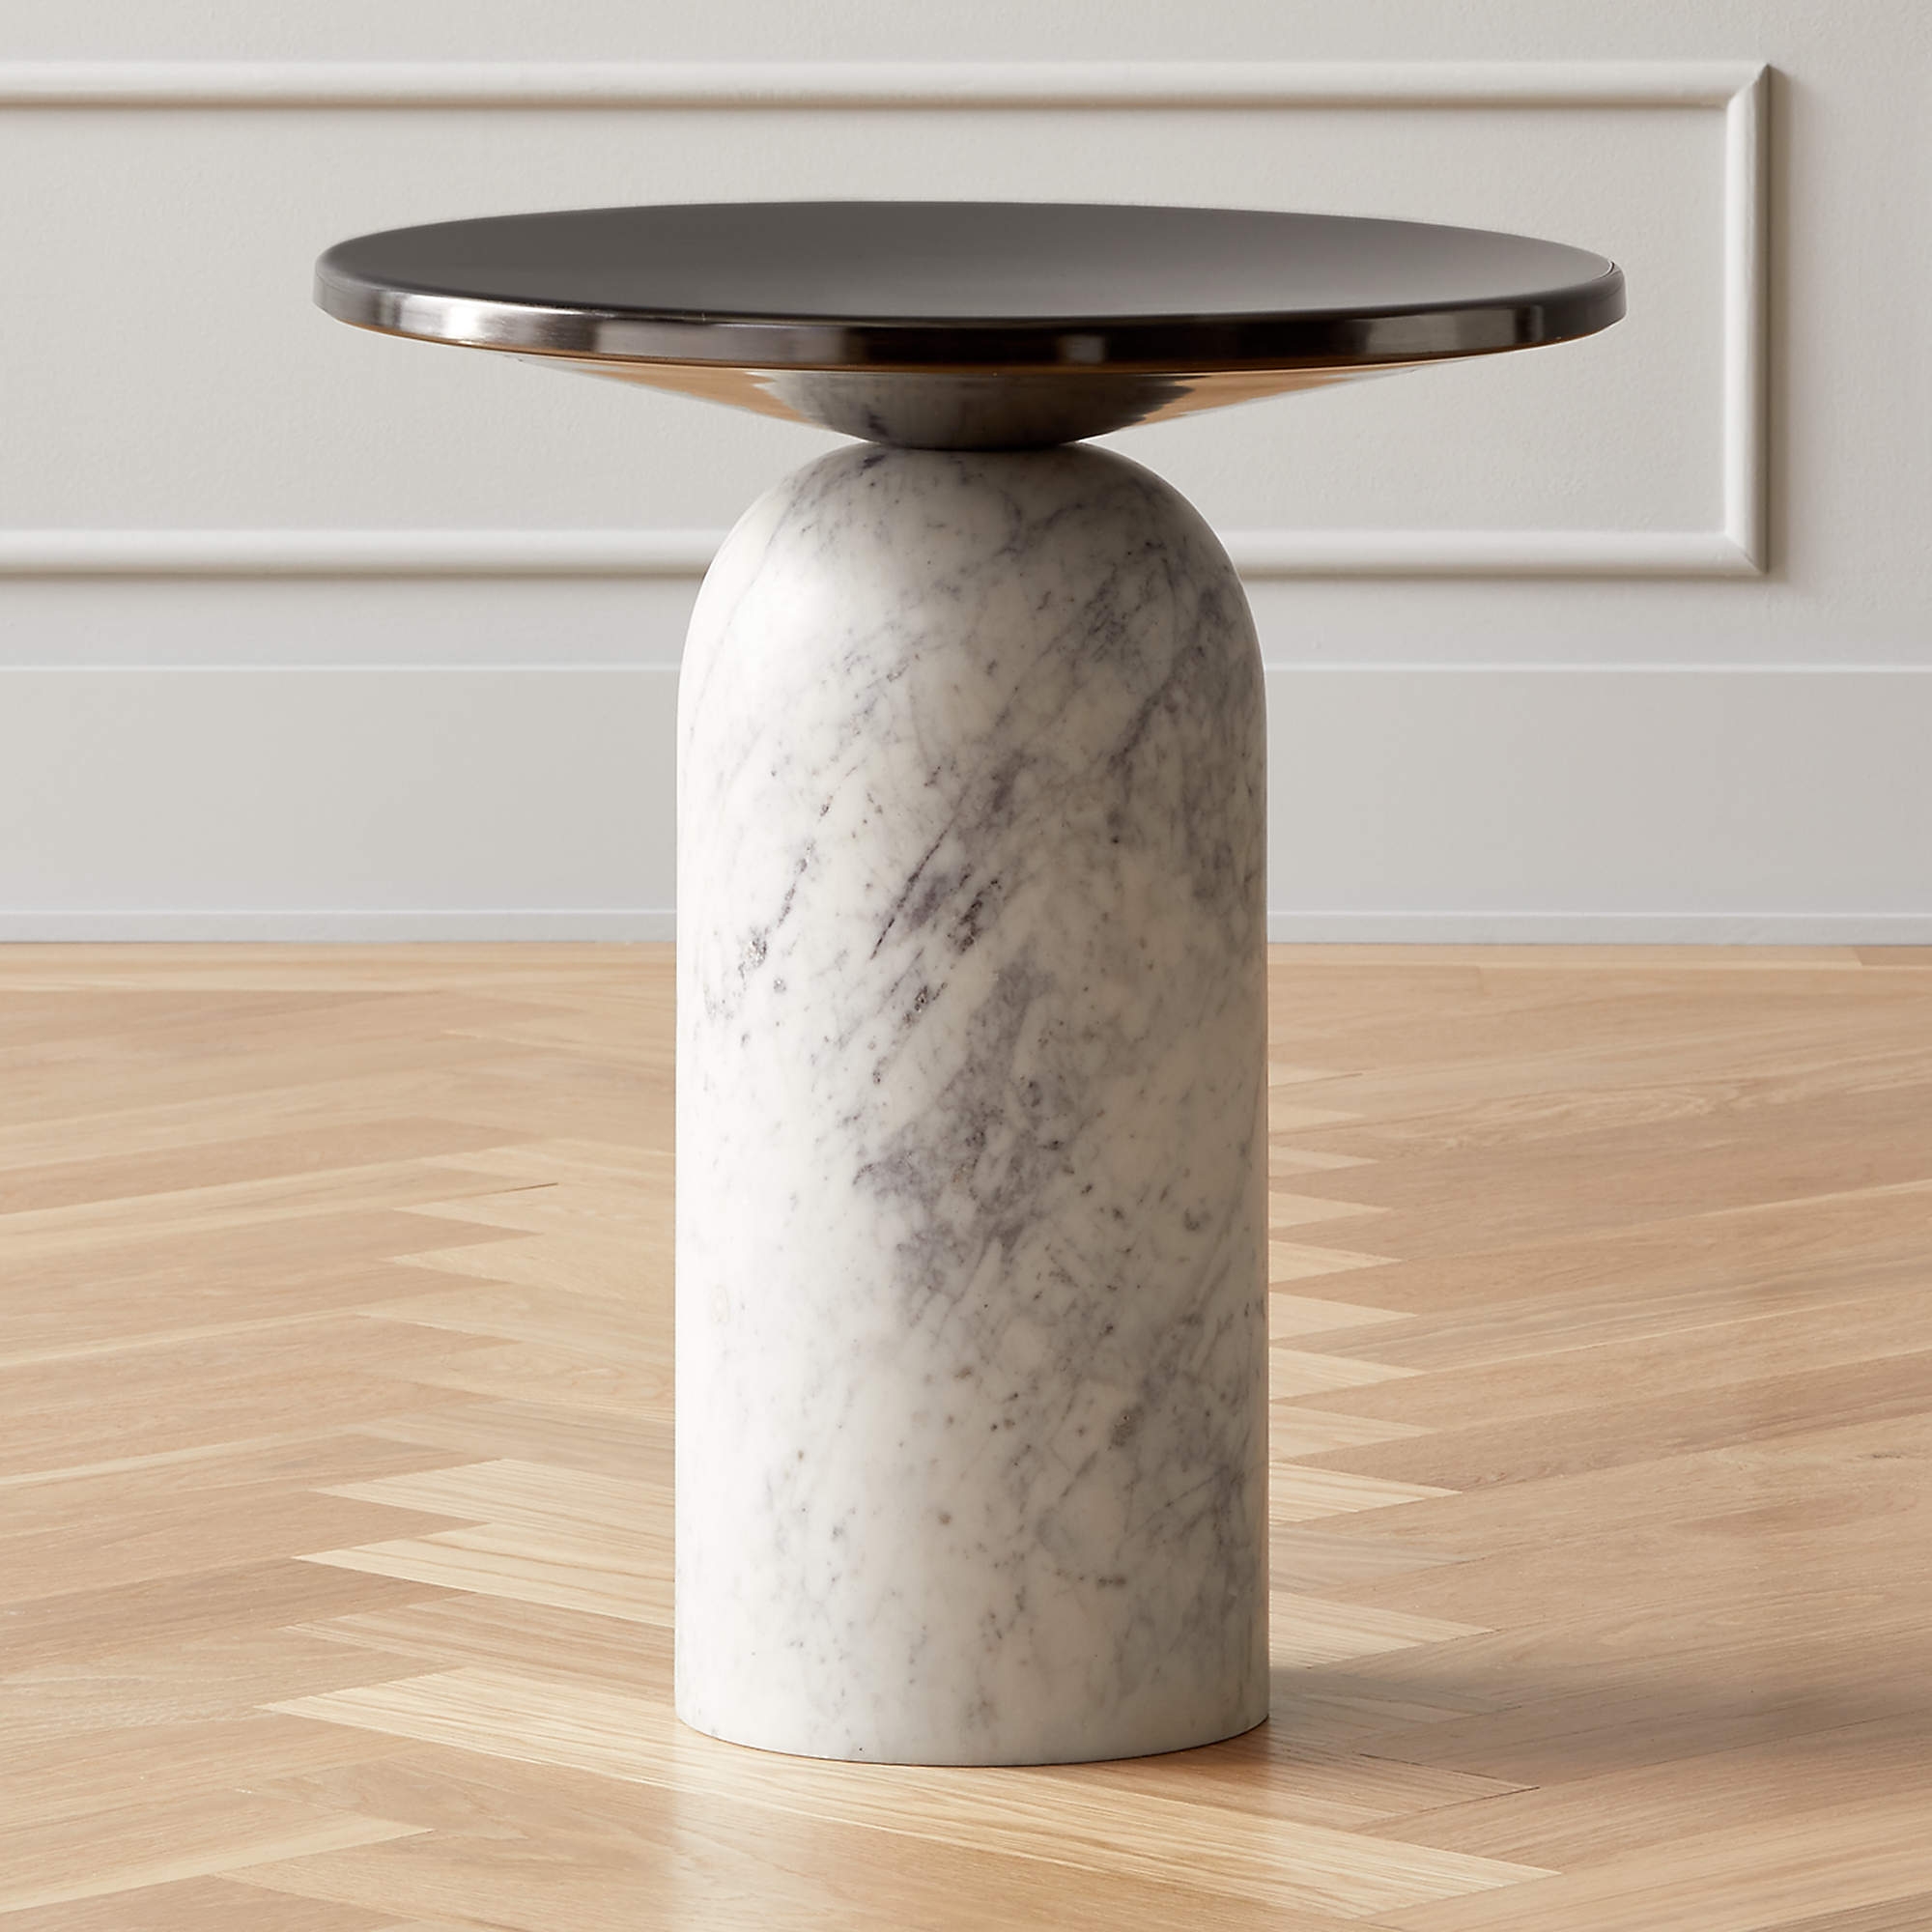 Martini Side Table with White Marble Base - Image 1